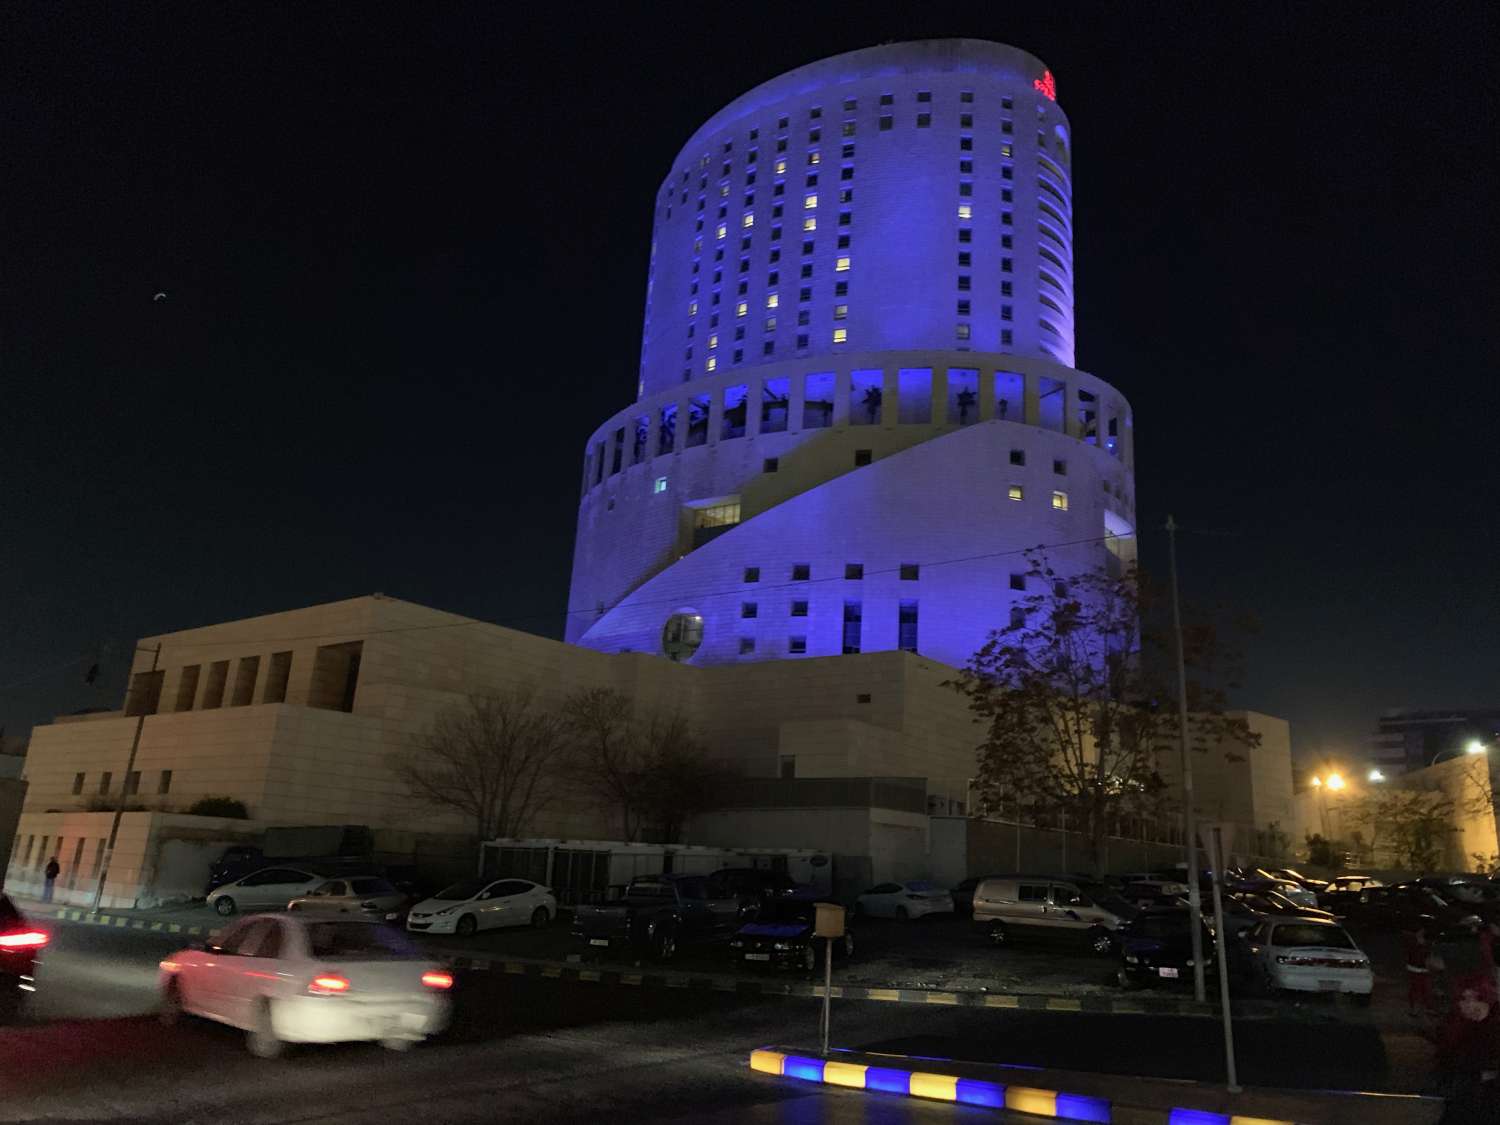 Exterior view of building at night with purple lights.